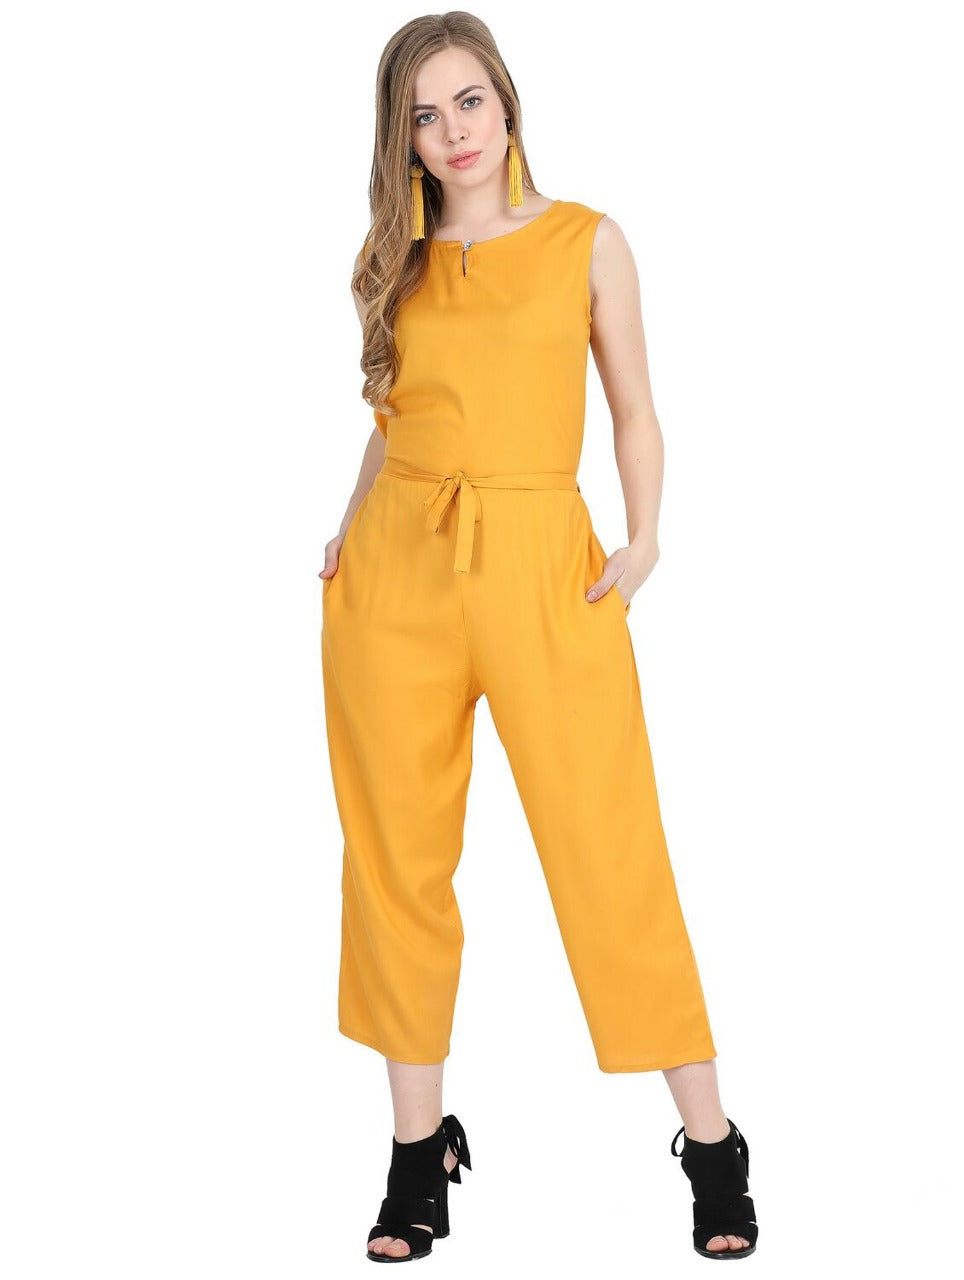 Buy RARE Solid VNeck Polyester Womens Jumpsuit Dress  Shoppers Stop